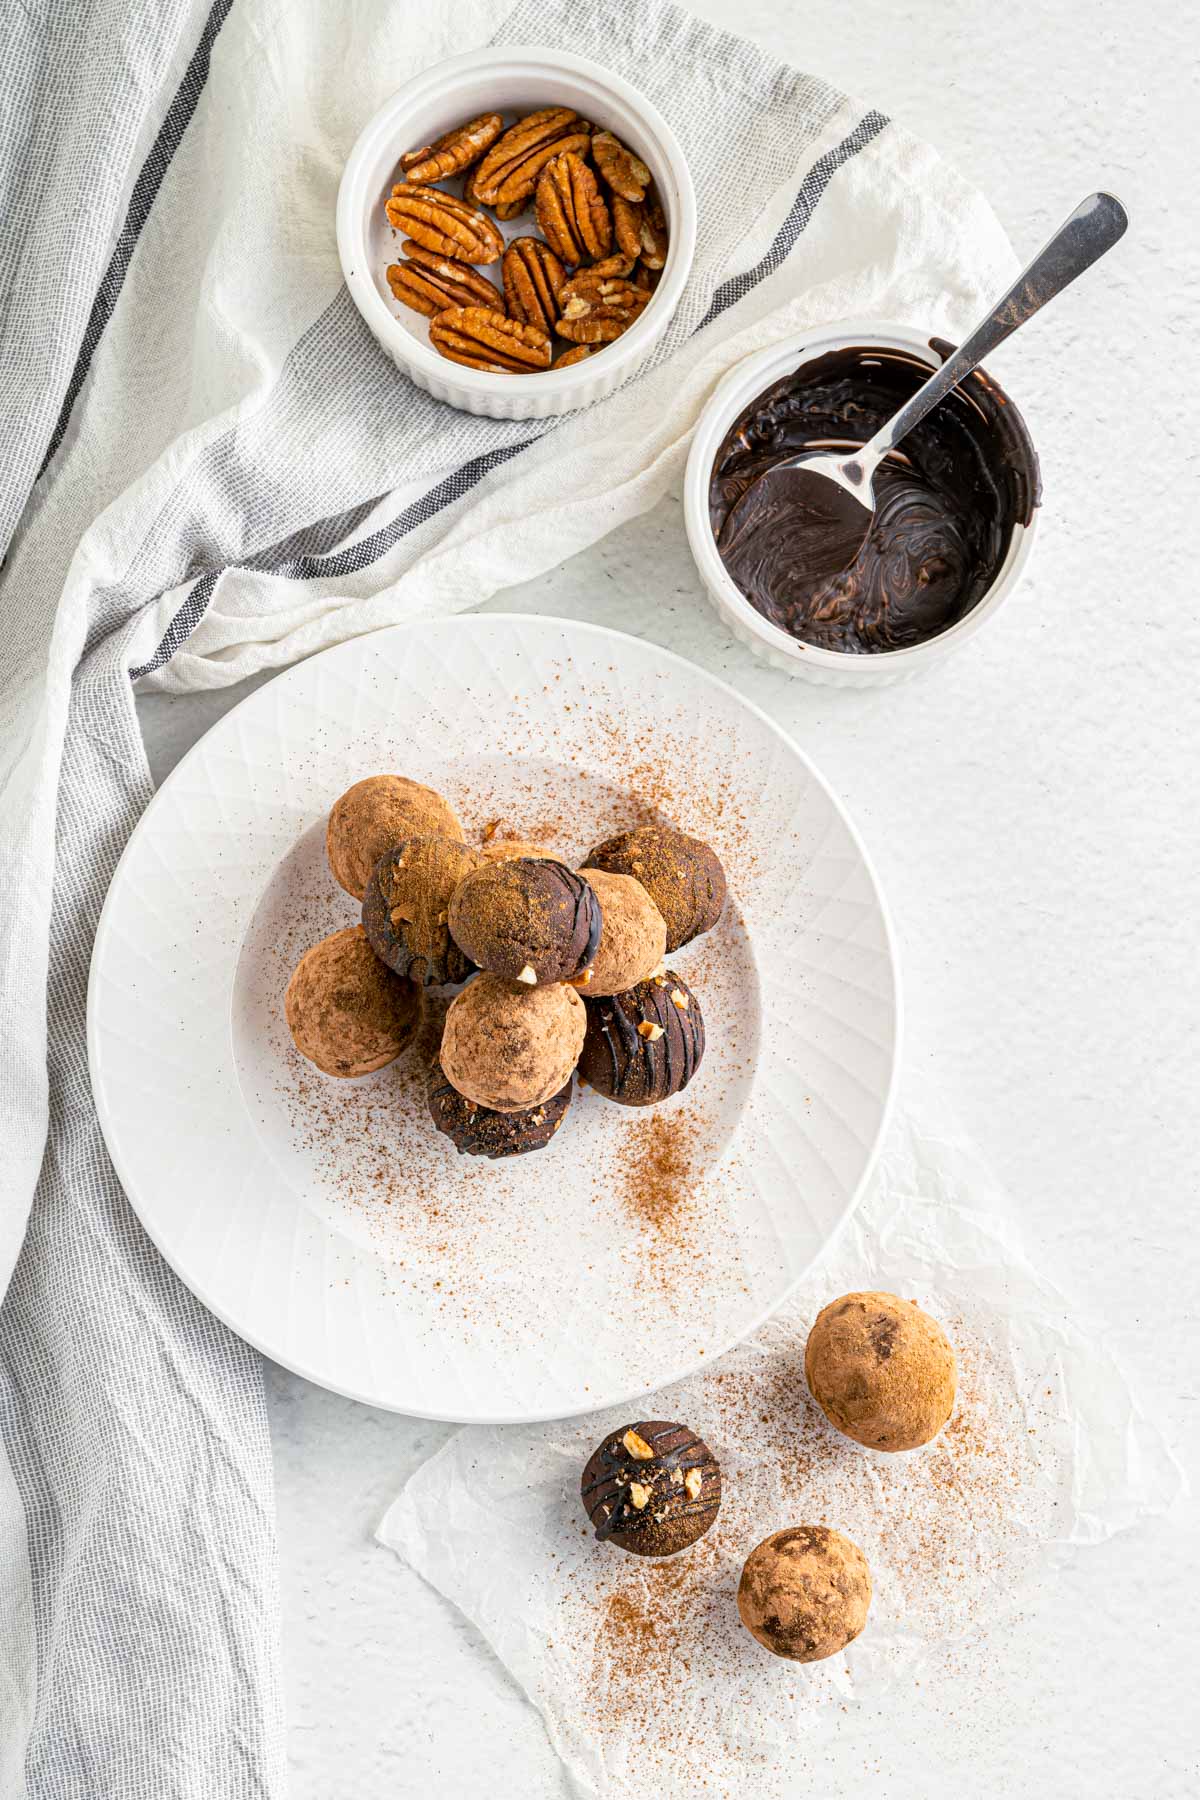 preparing truffles with chocolate drizzle and cocoa powder